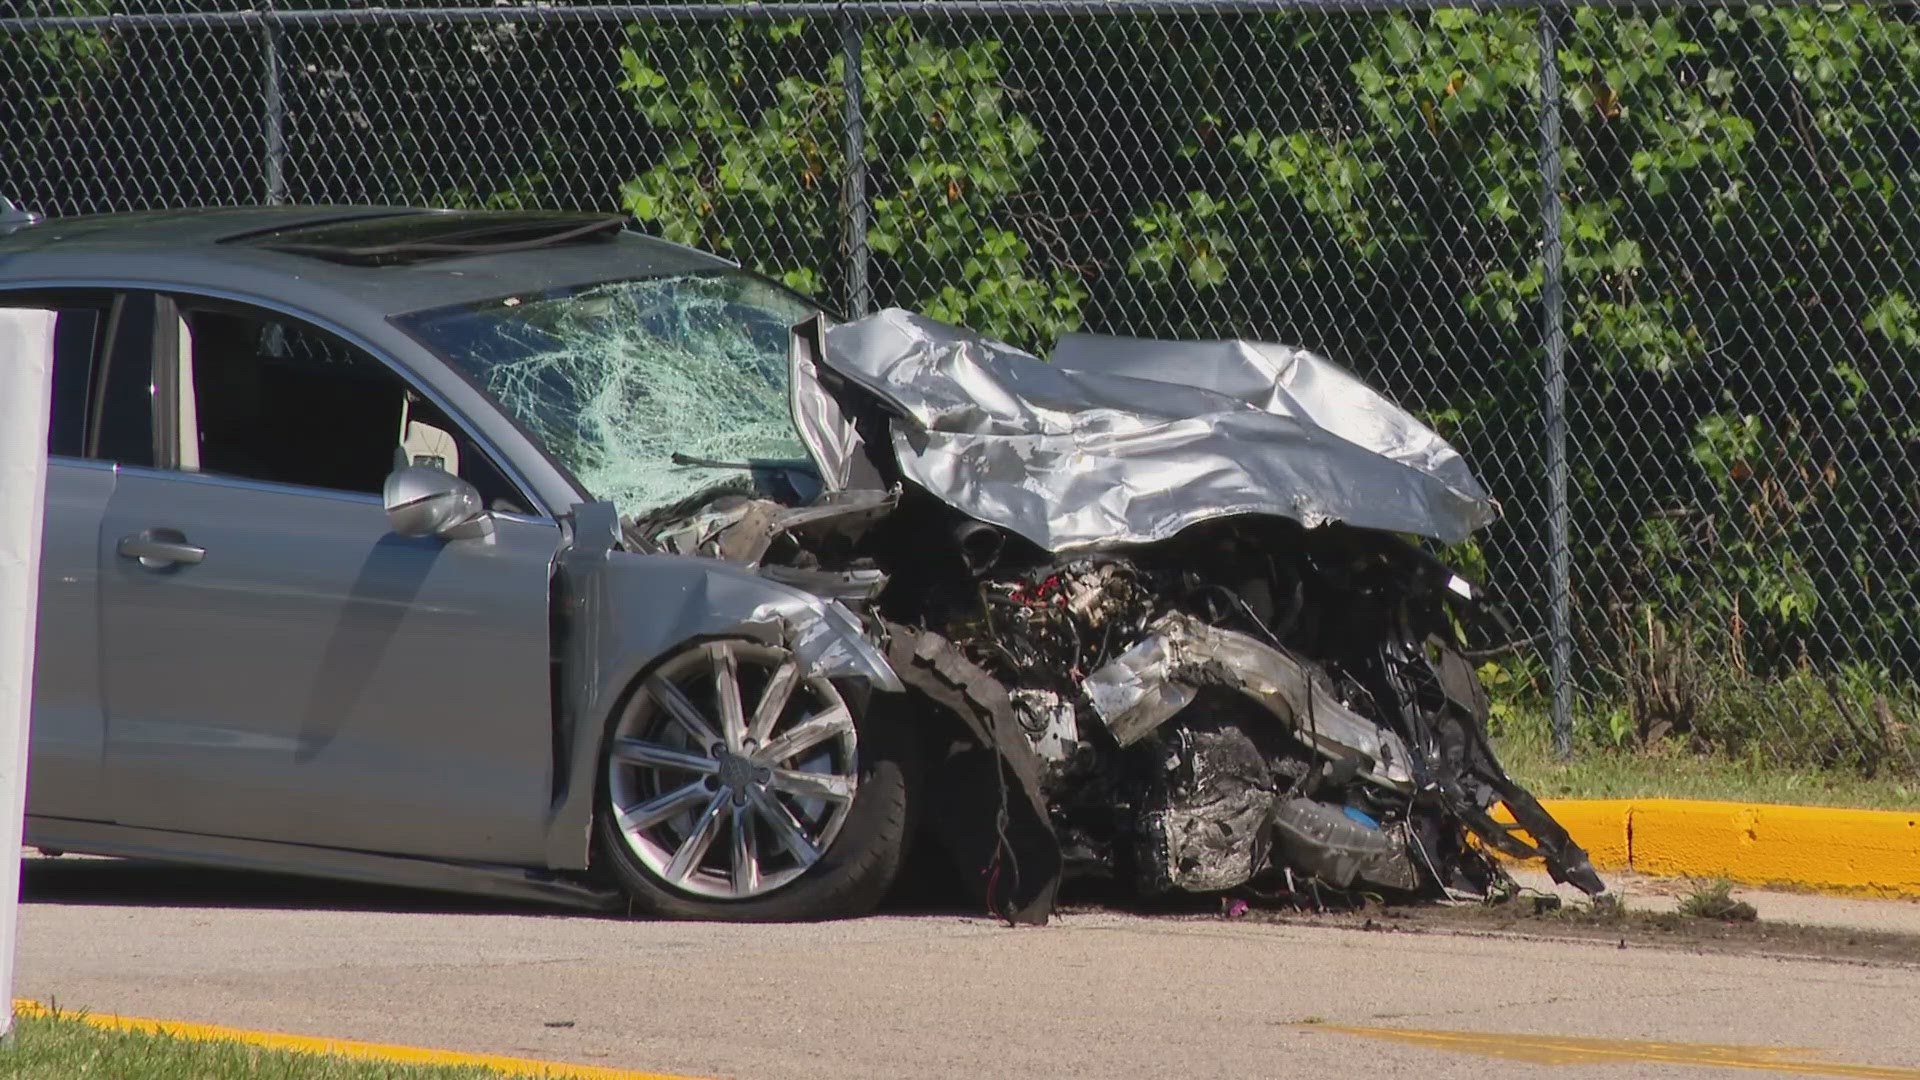 IMPD said officers responded to a report of a serious bodily injury crash on the 6000 block of Michigan Road Thursday morning.